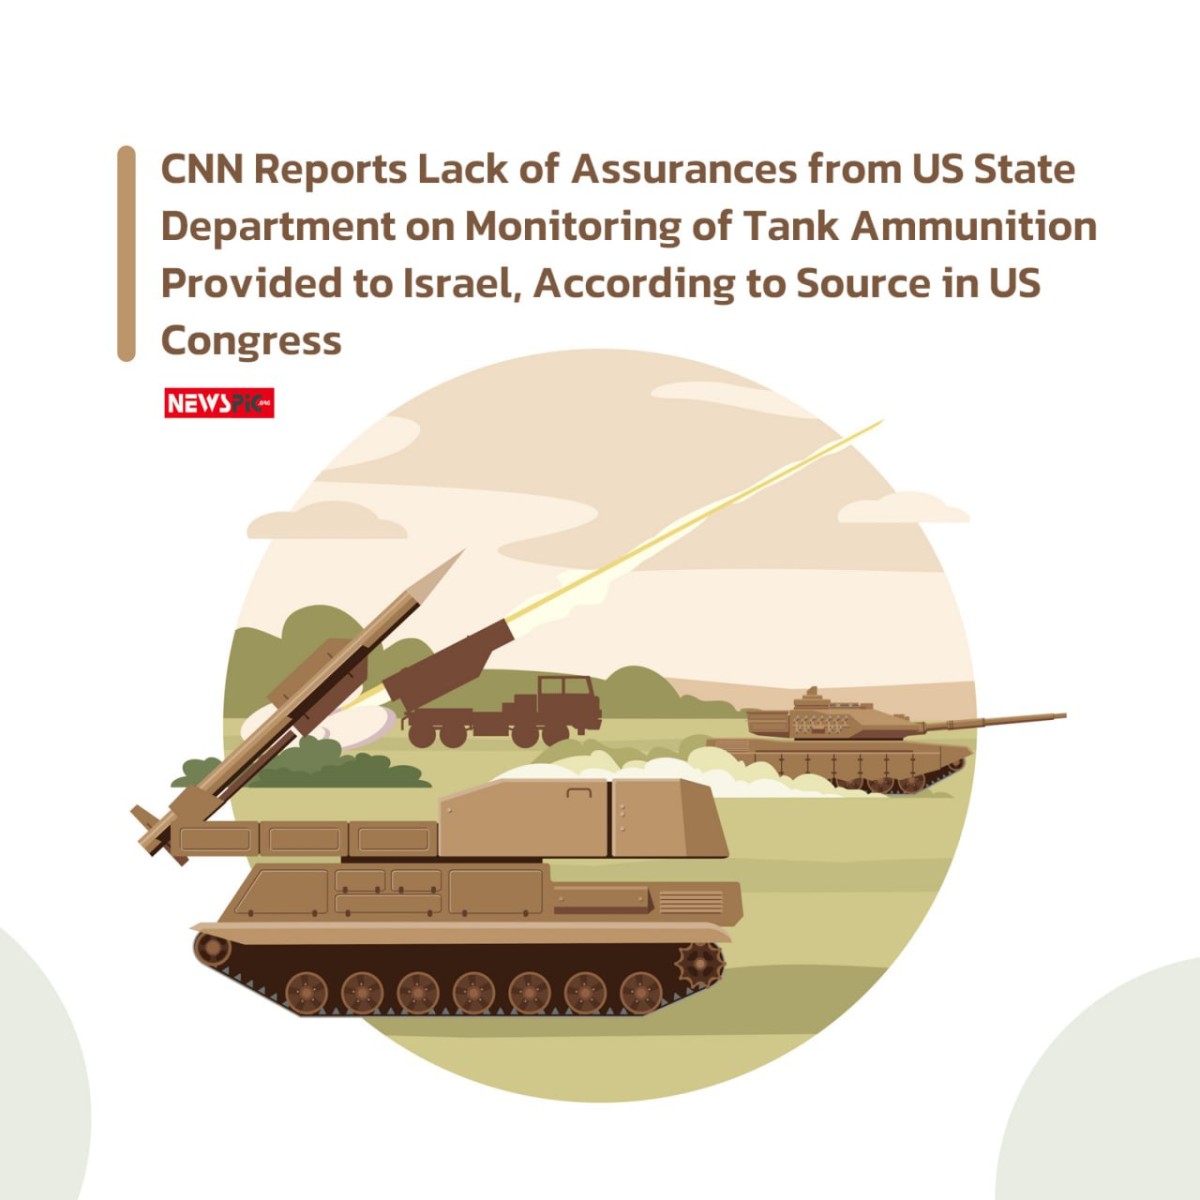 CNN Reports Lack of Assurances from US State Department on Monitoring of Tank Ammunition Provided to Israel, According to Source in US Congress